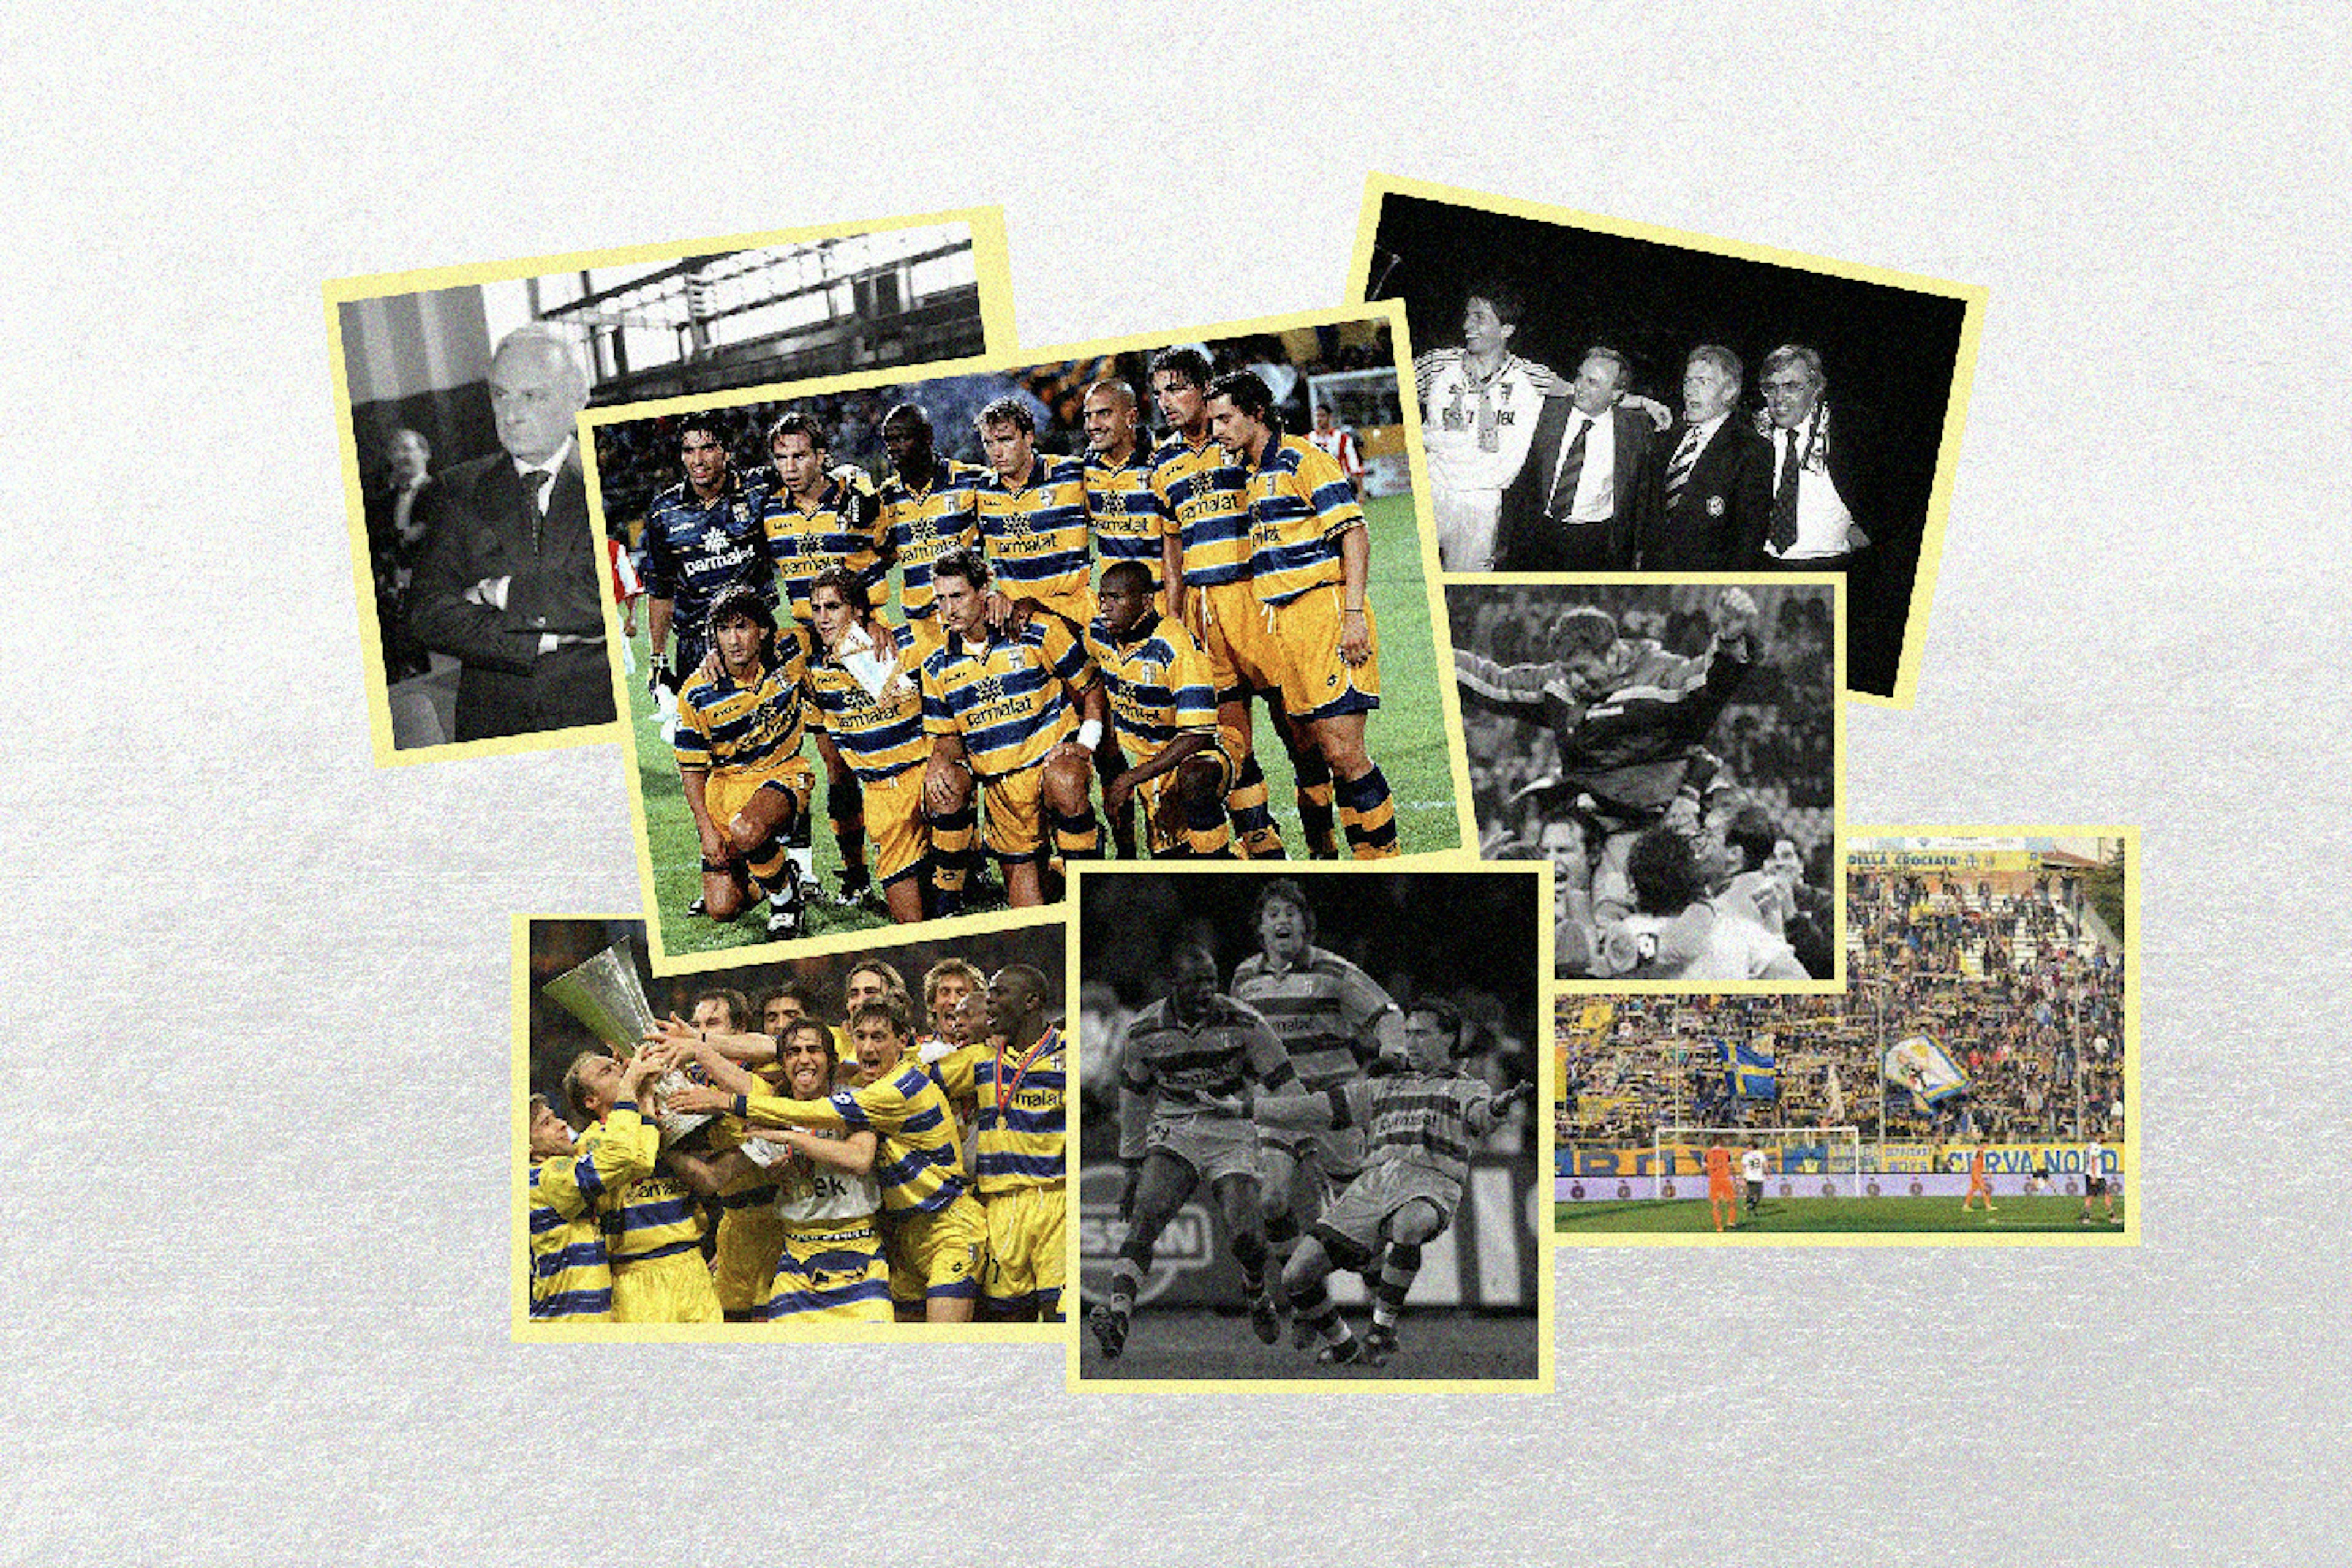 Cover Image for Parma: The Last (Italian UEFA Cup) Champions